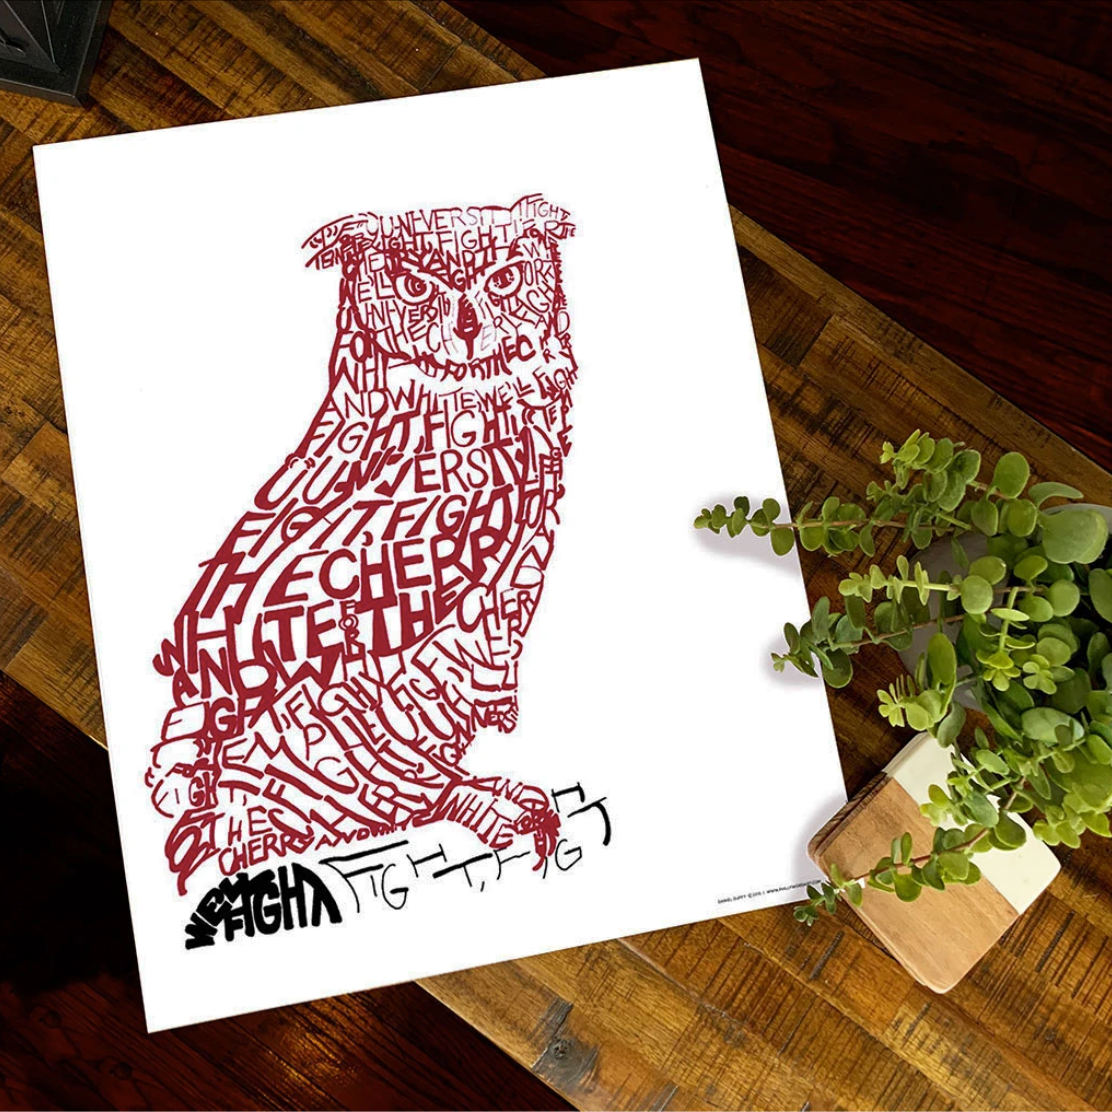 Temple Owl Fight Song Print by Philly Word Art